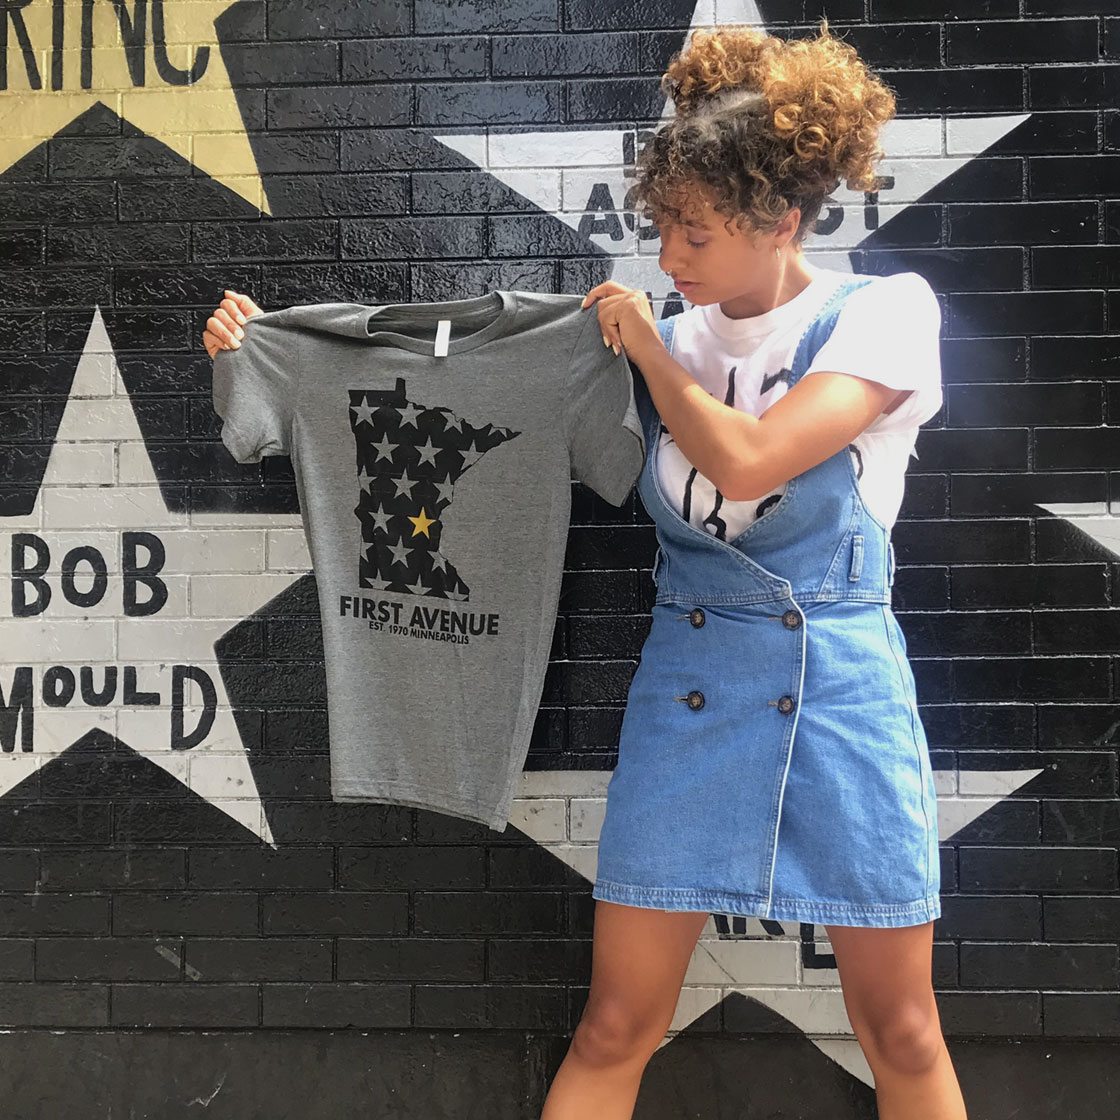 Someone holding a t-shirt up against a black wall with painted stars.